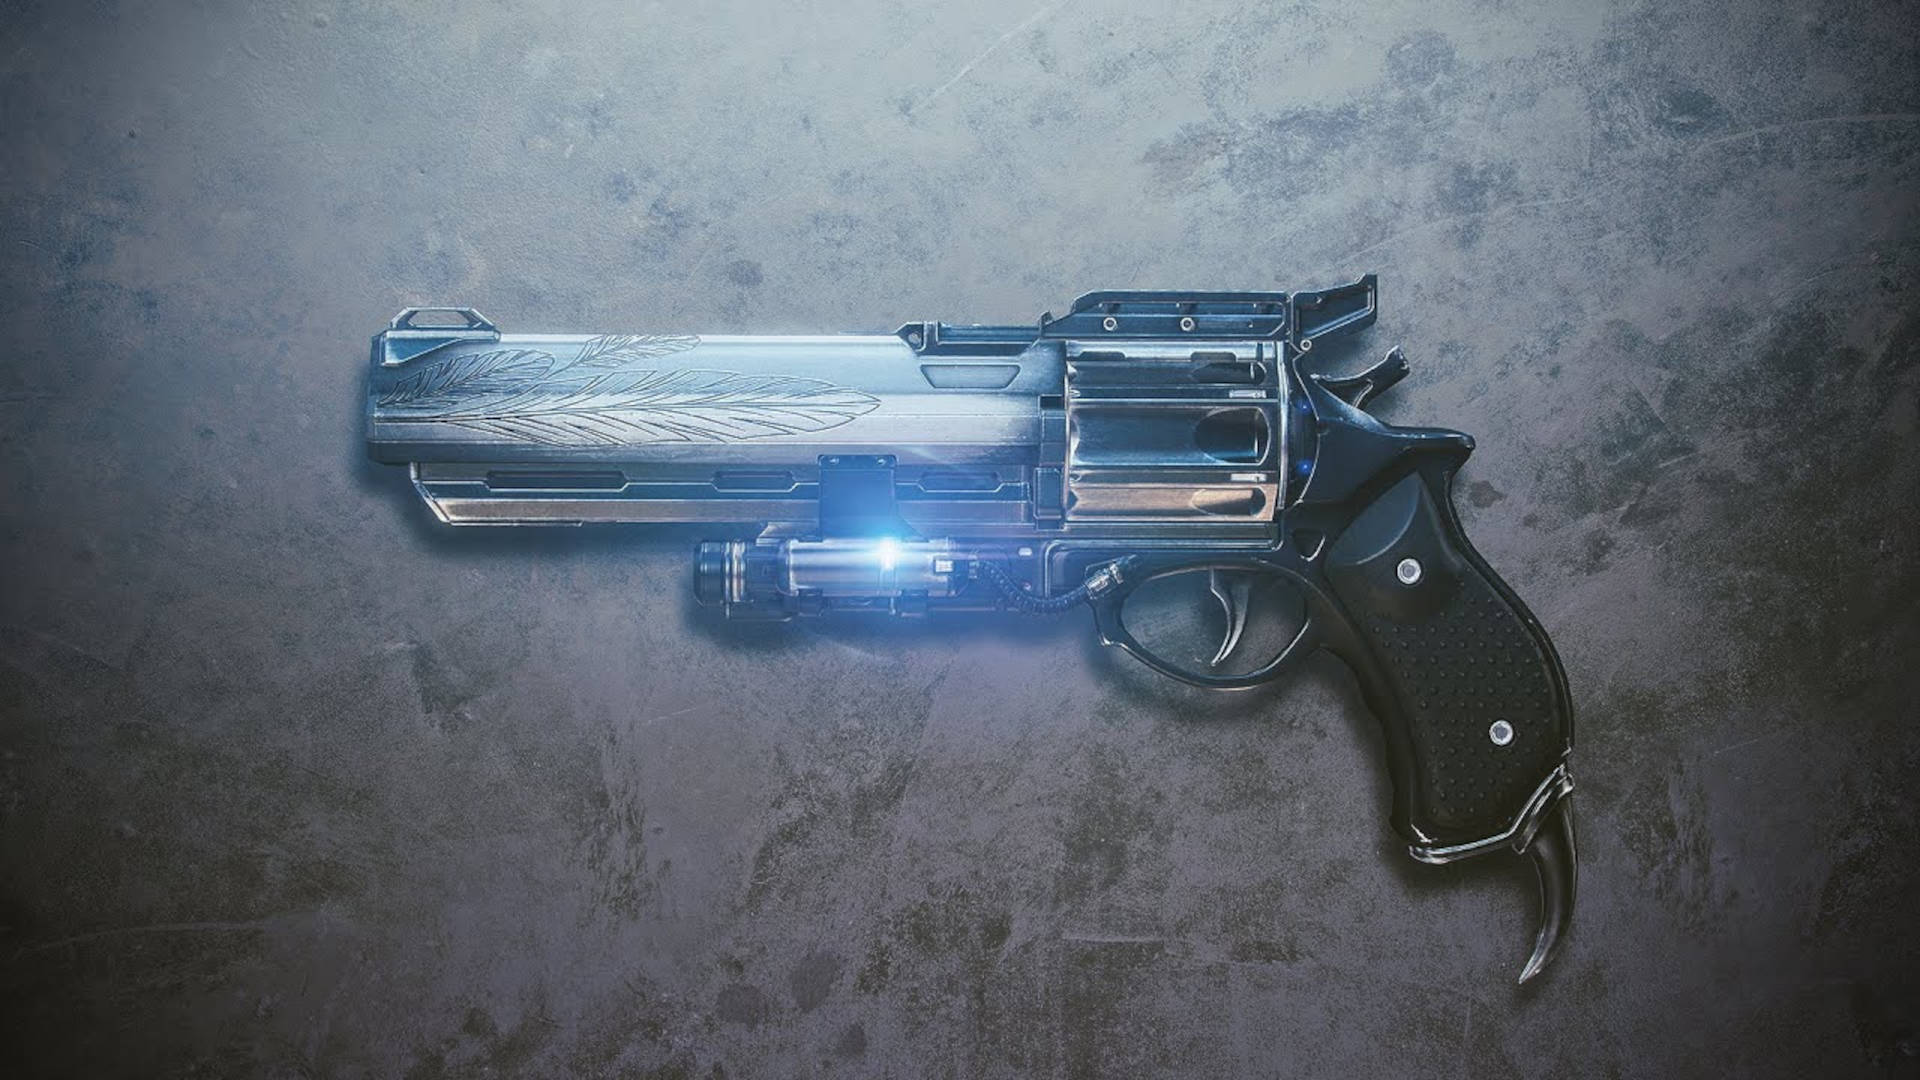 How to get the Destiny 2 Hawkmoon exotic hand cannon